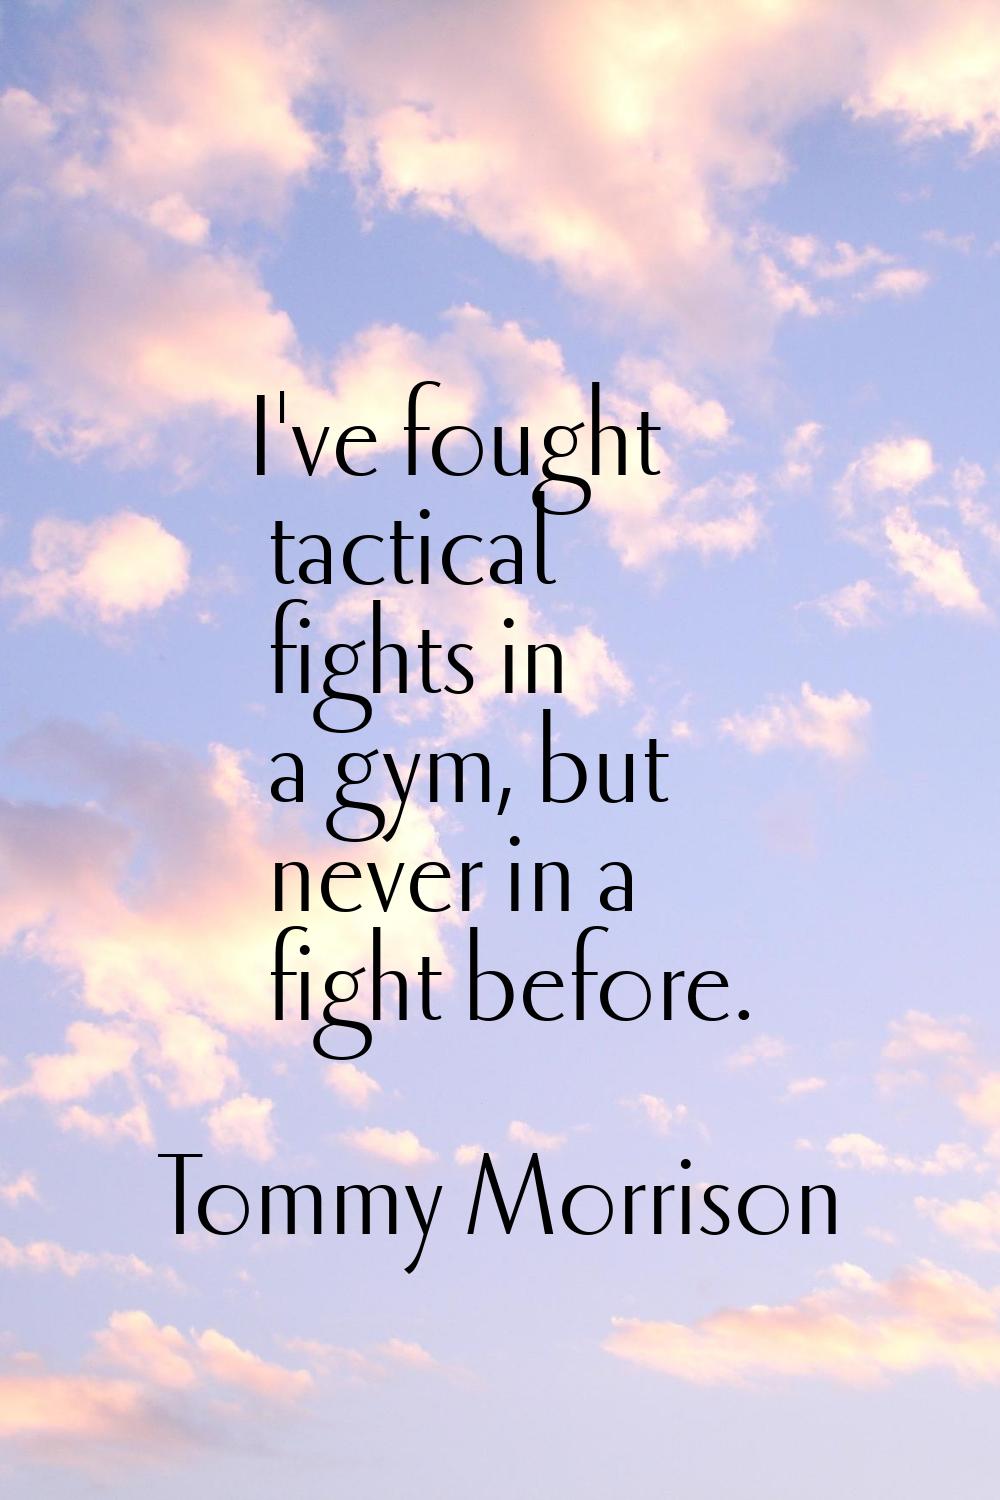 I've fought tactical fights in a gym, but never in a fight before.